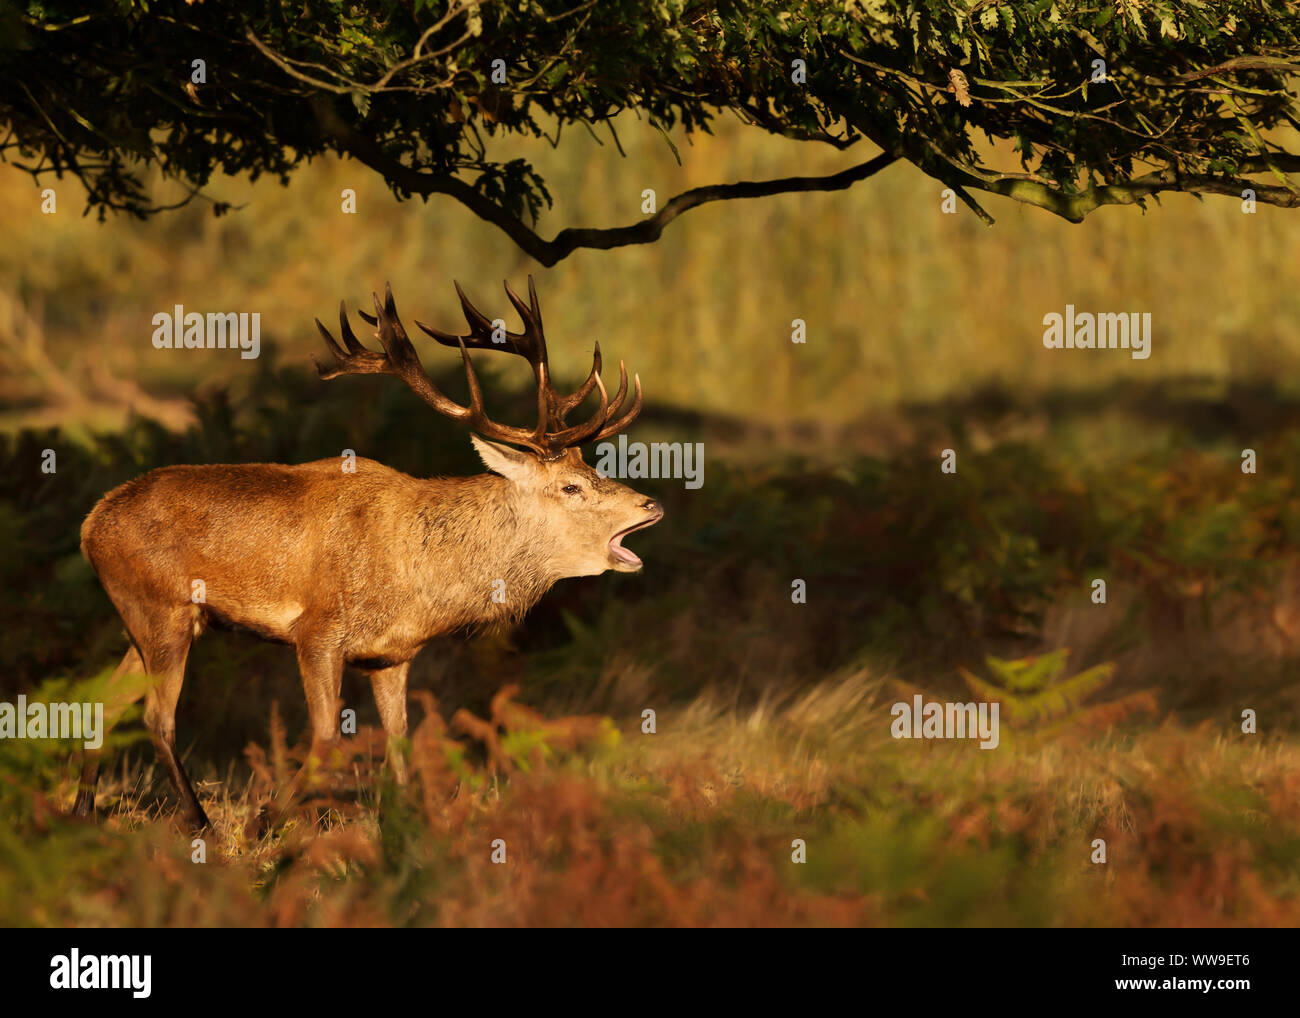 Close-up of red deer stag calling during rutting season in autumn, UK. Stock Photo